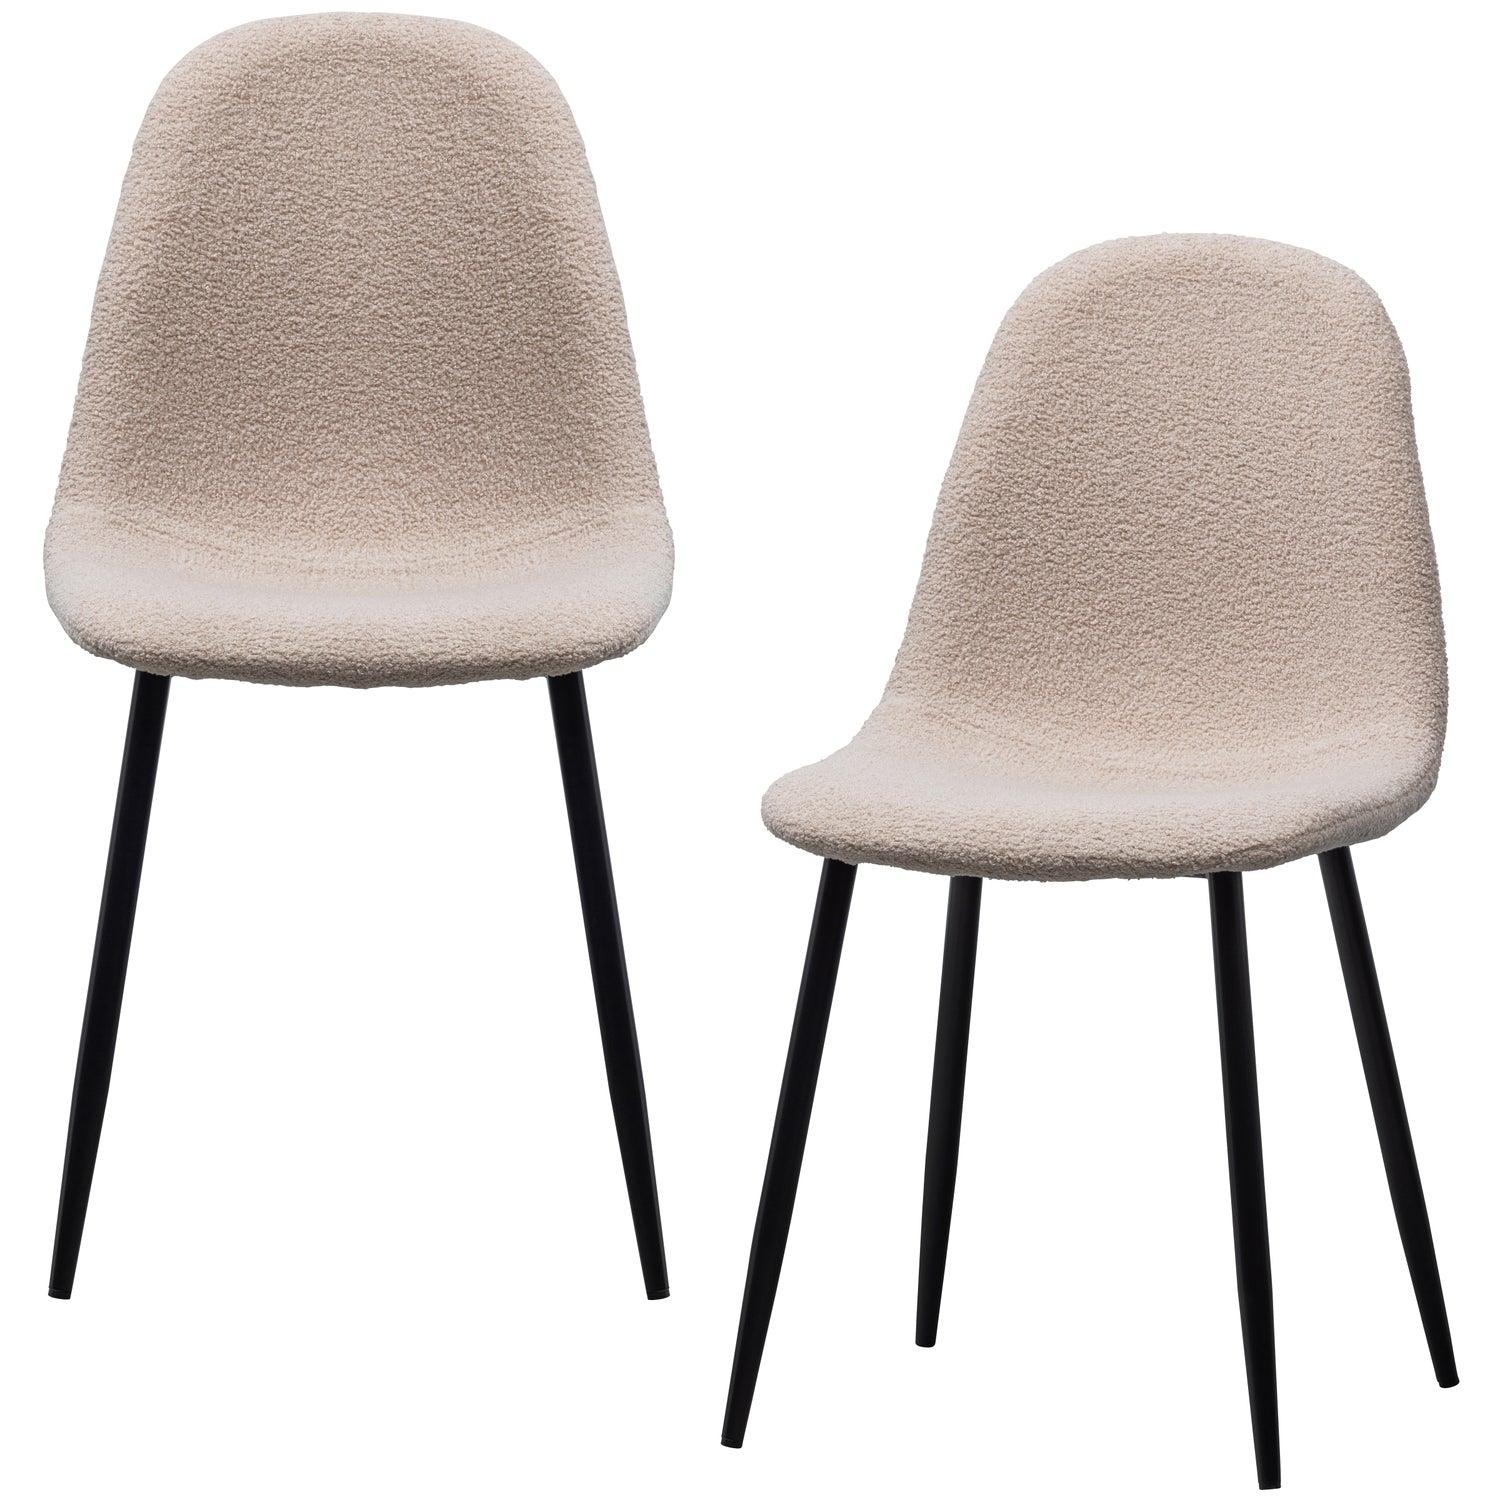 SET OF 2 - MARIJE DINING CHAIR TEDDY TAUPE